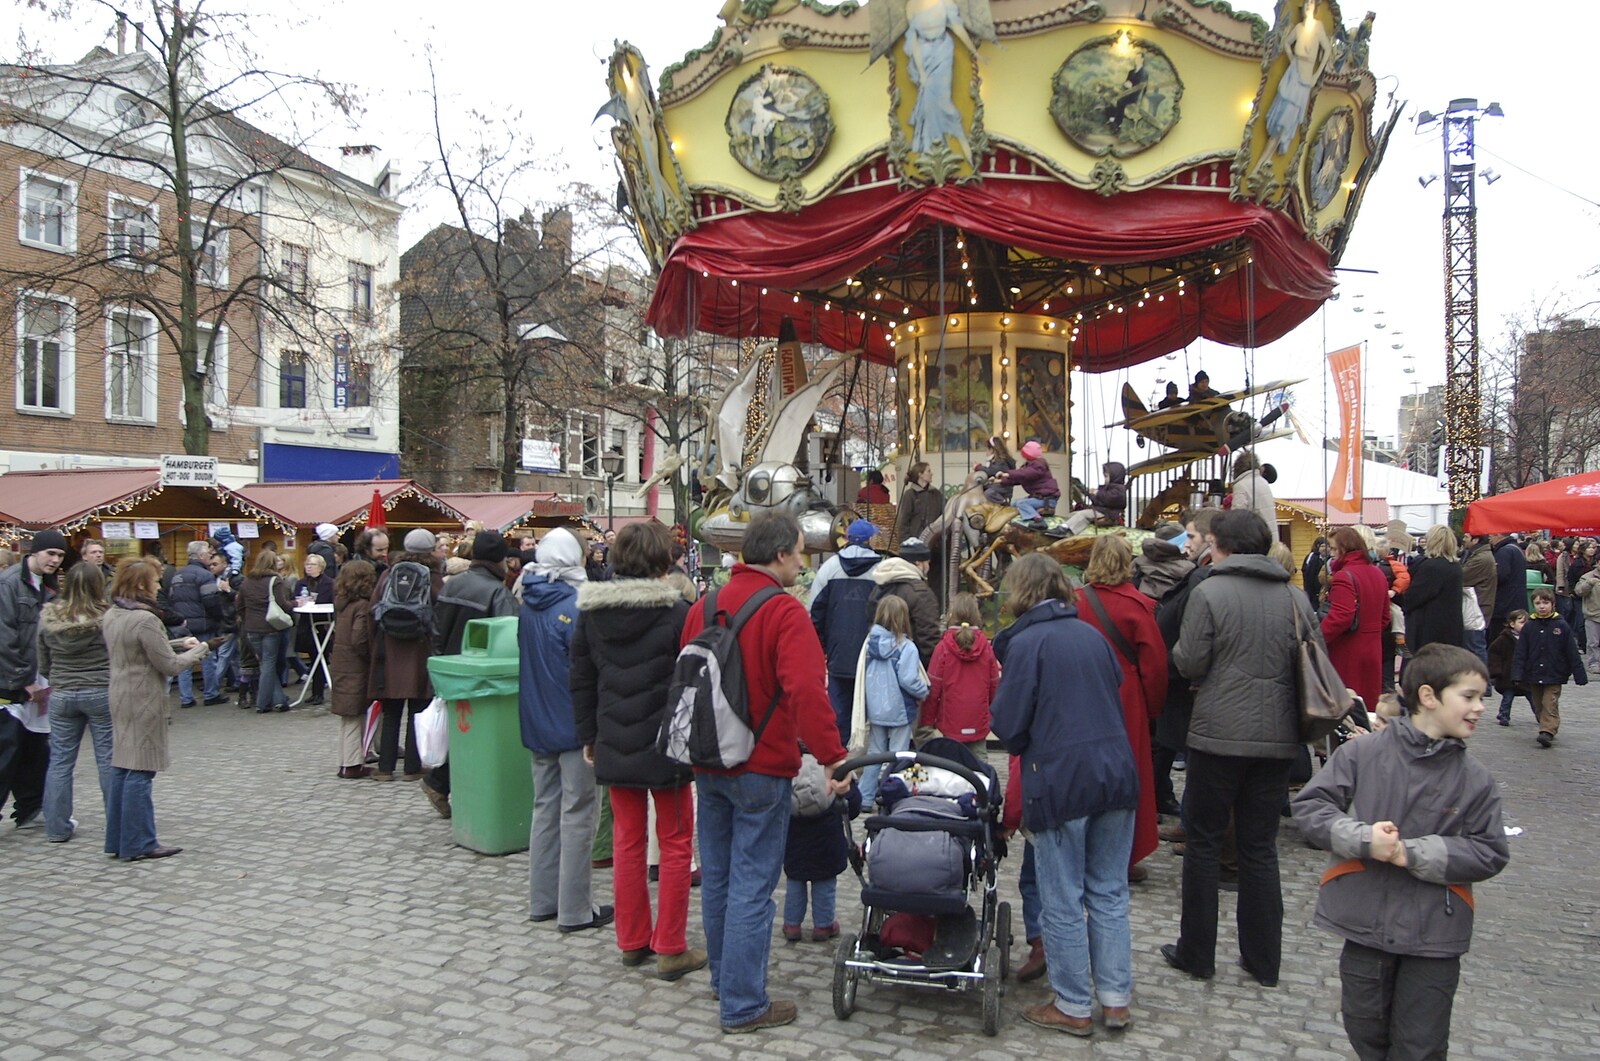 An old-style carousel from The Christmas Markets of Brussels, Belgium - 1st January 2007